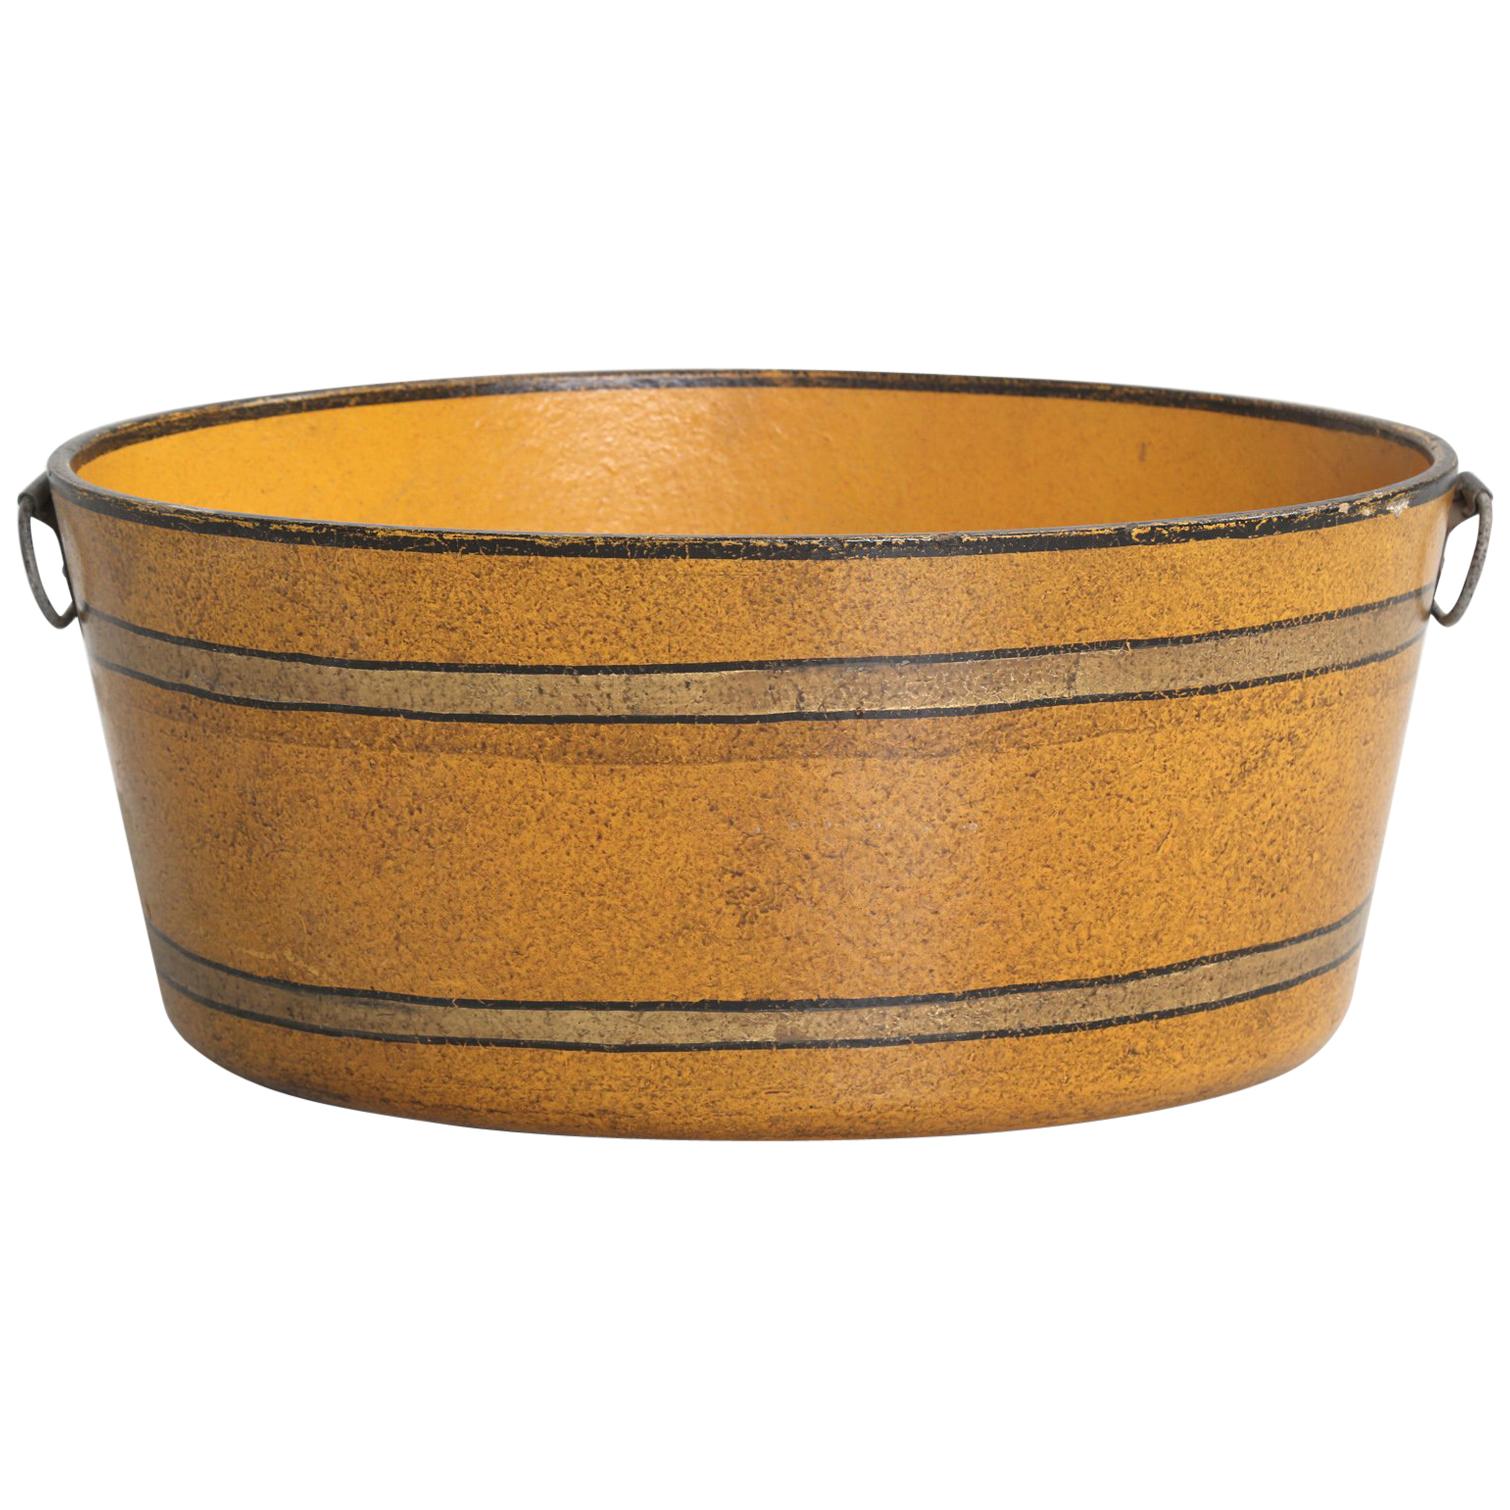 Antique French Paper-Mâché Bucket in a Beautiful Ochre Color, 1stdibs New York For Sale